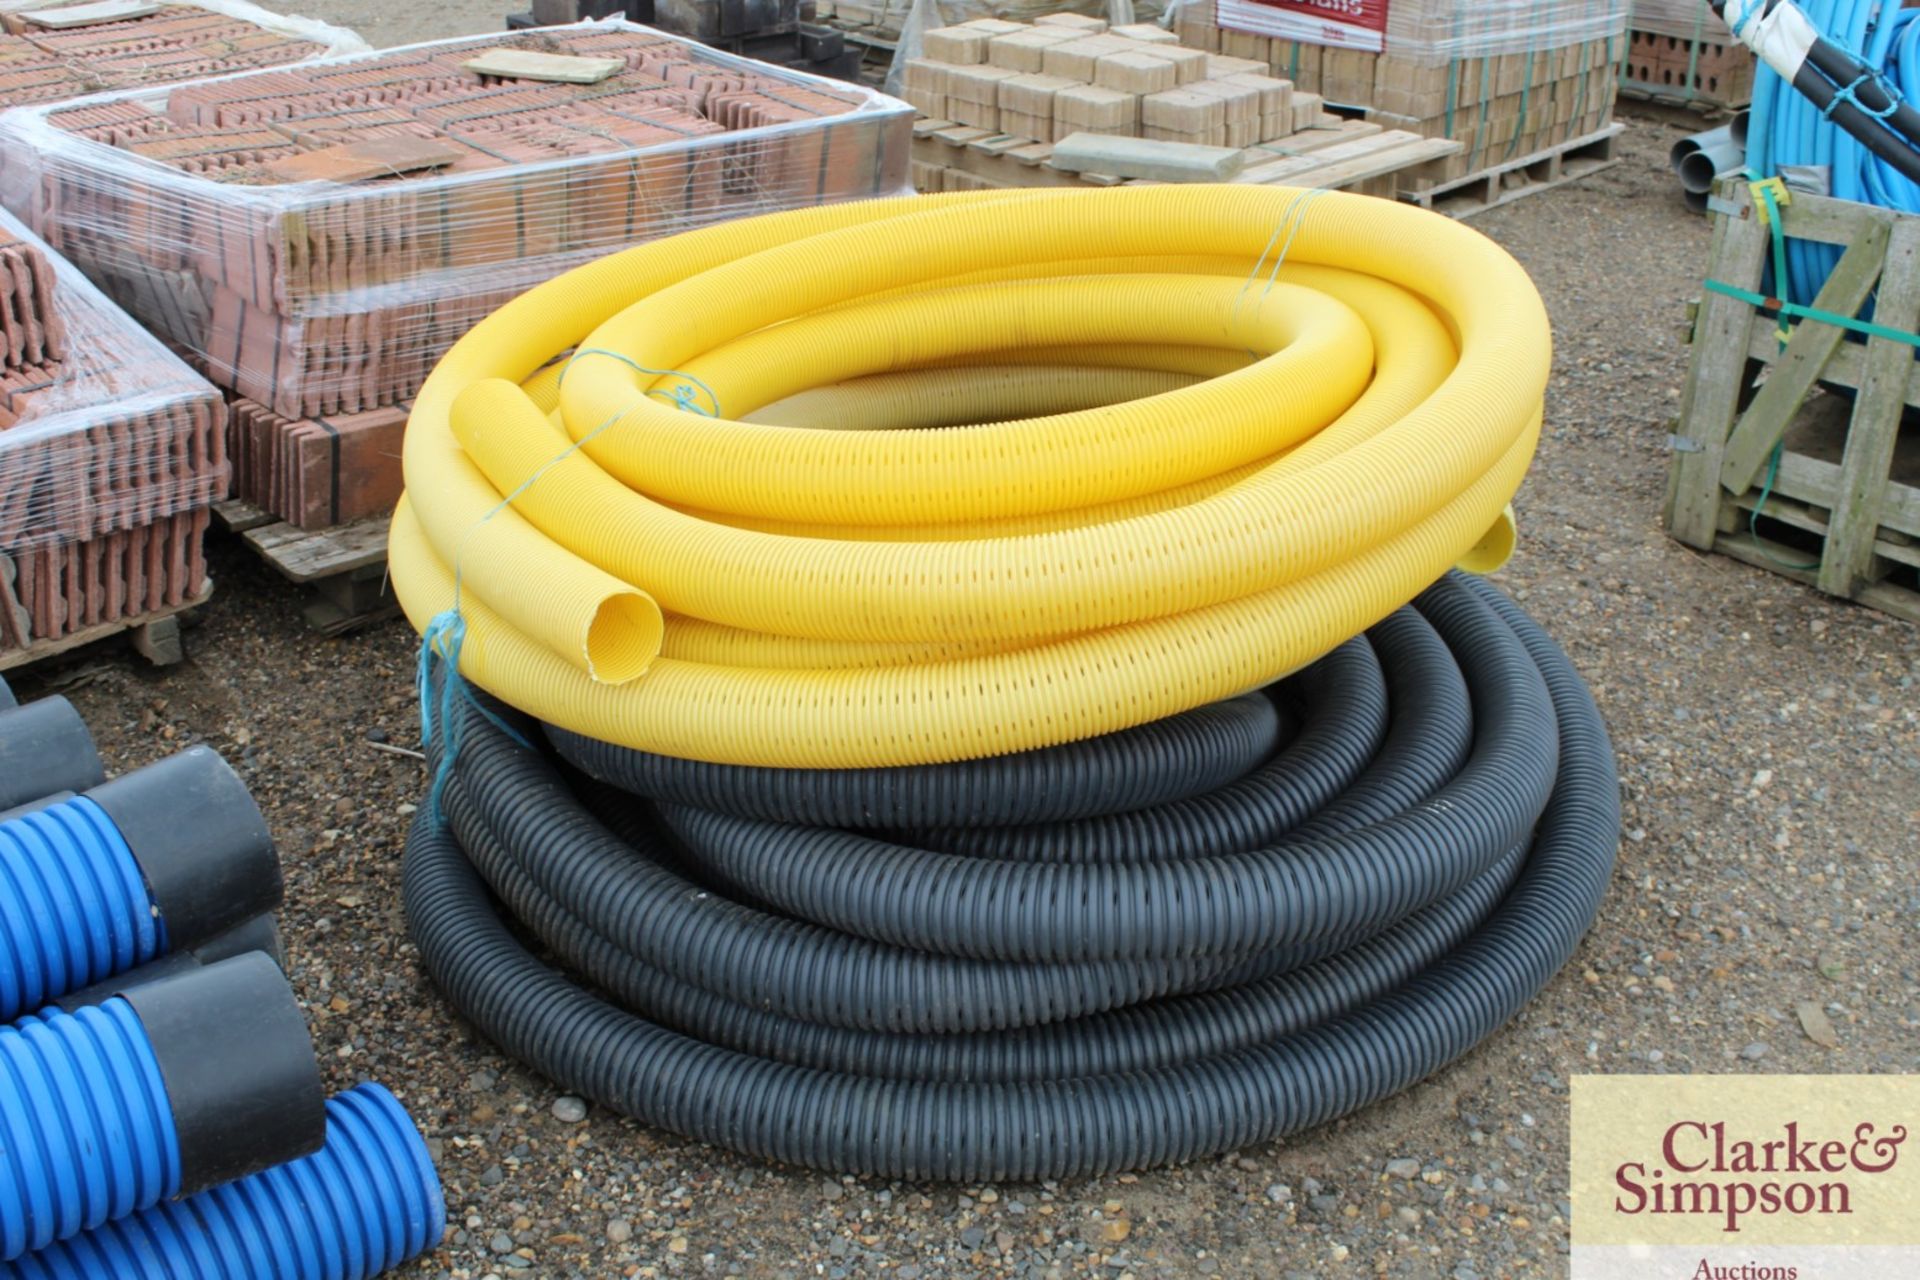 Quantity of perferated drainage pipe.